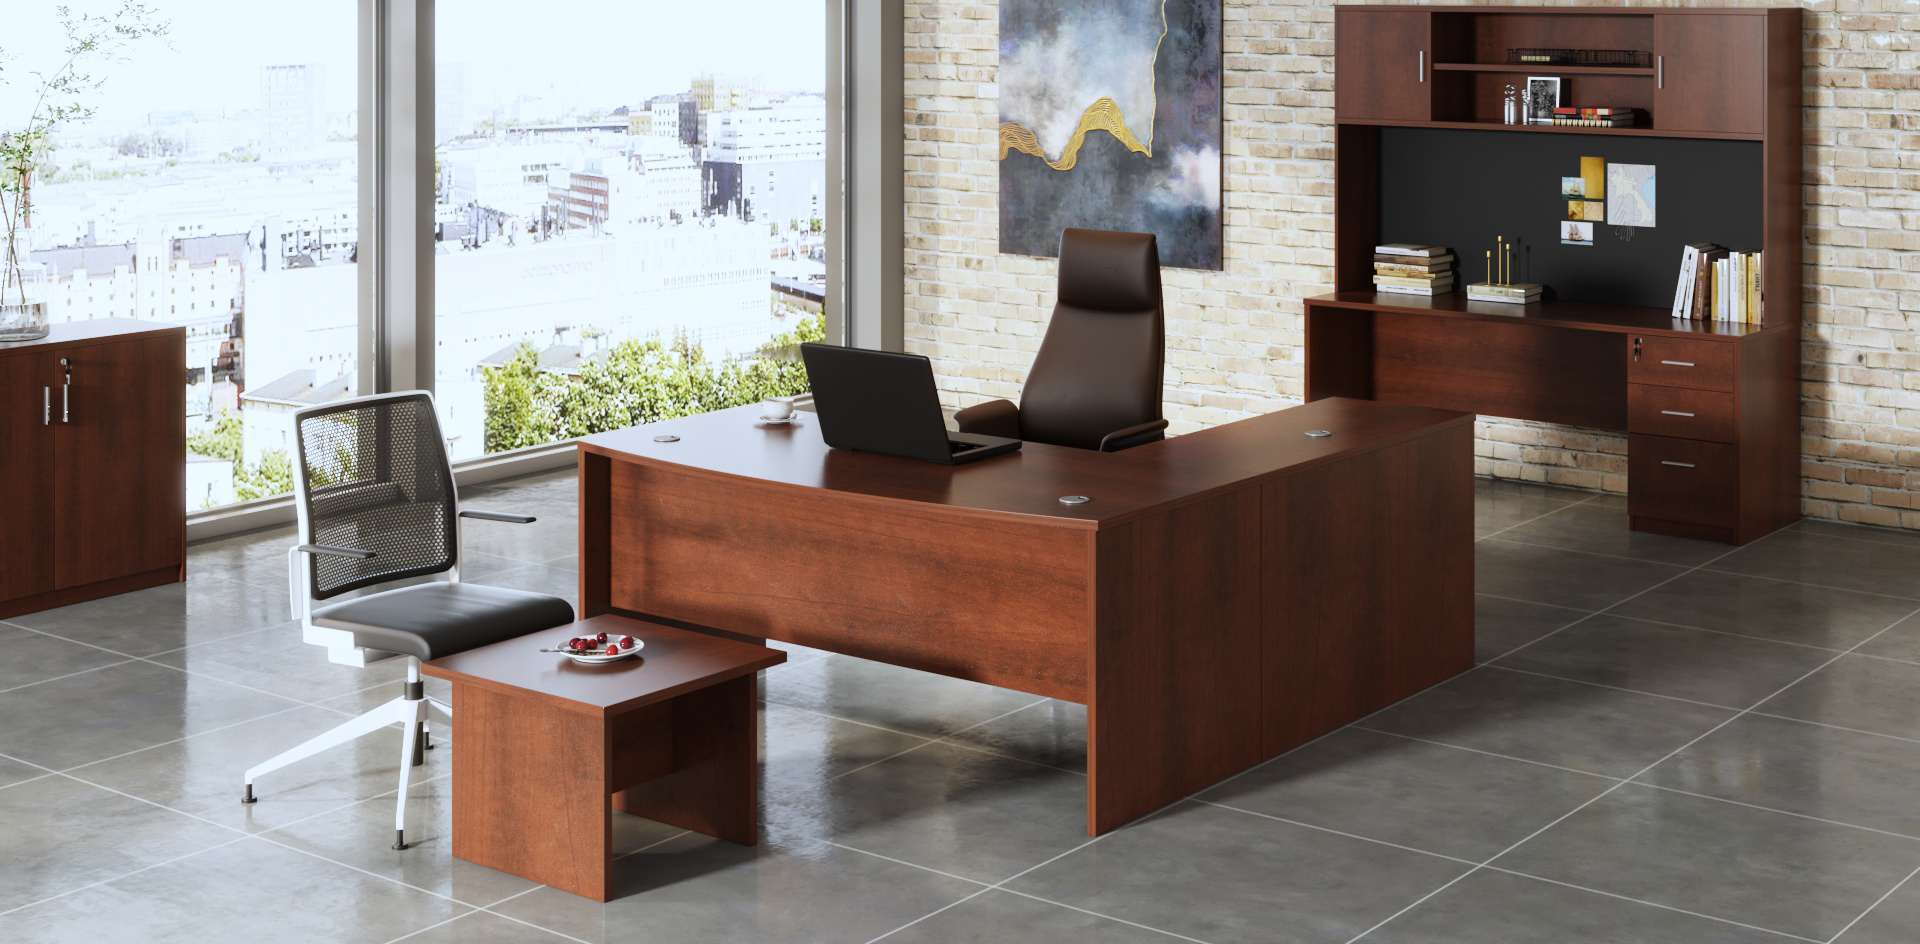 Guangzhou original design and custom production of wooden office furniture CEQ home desk